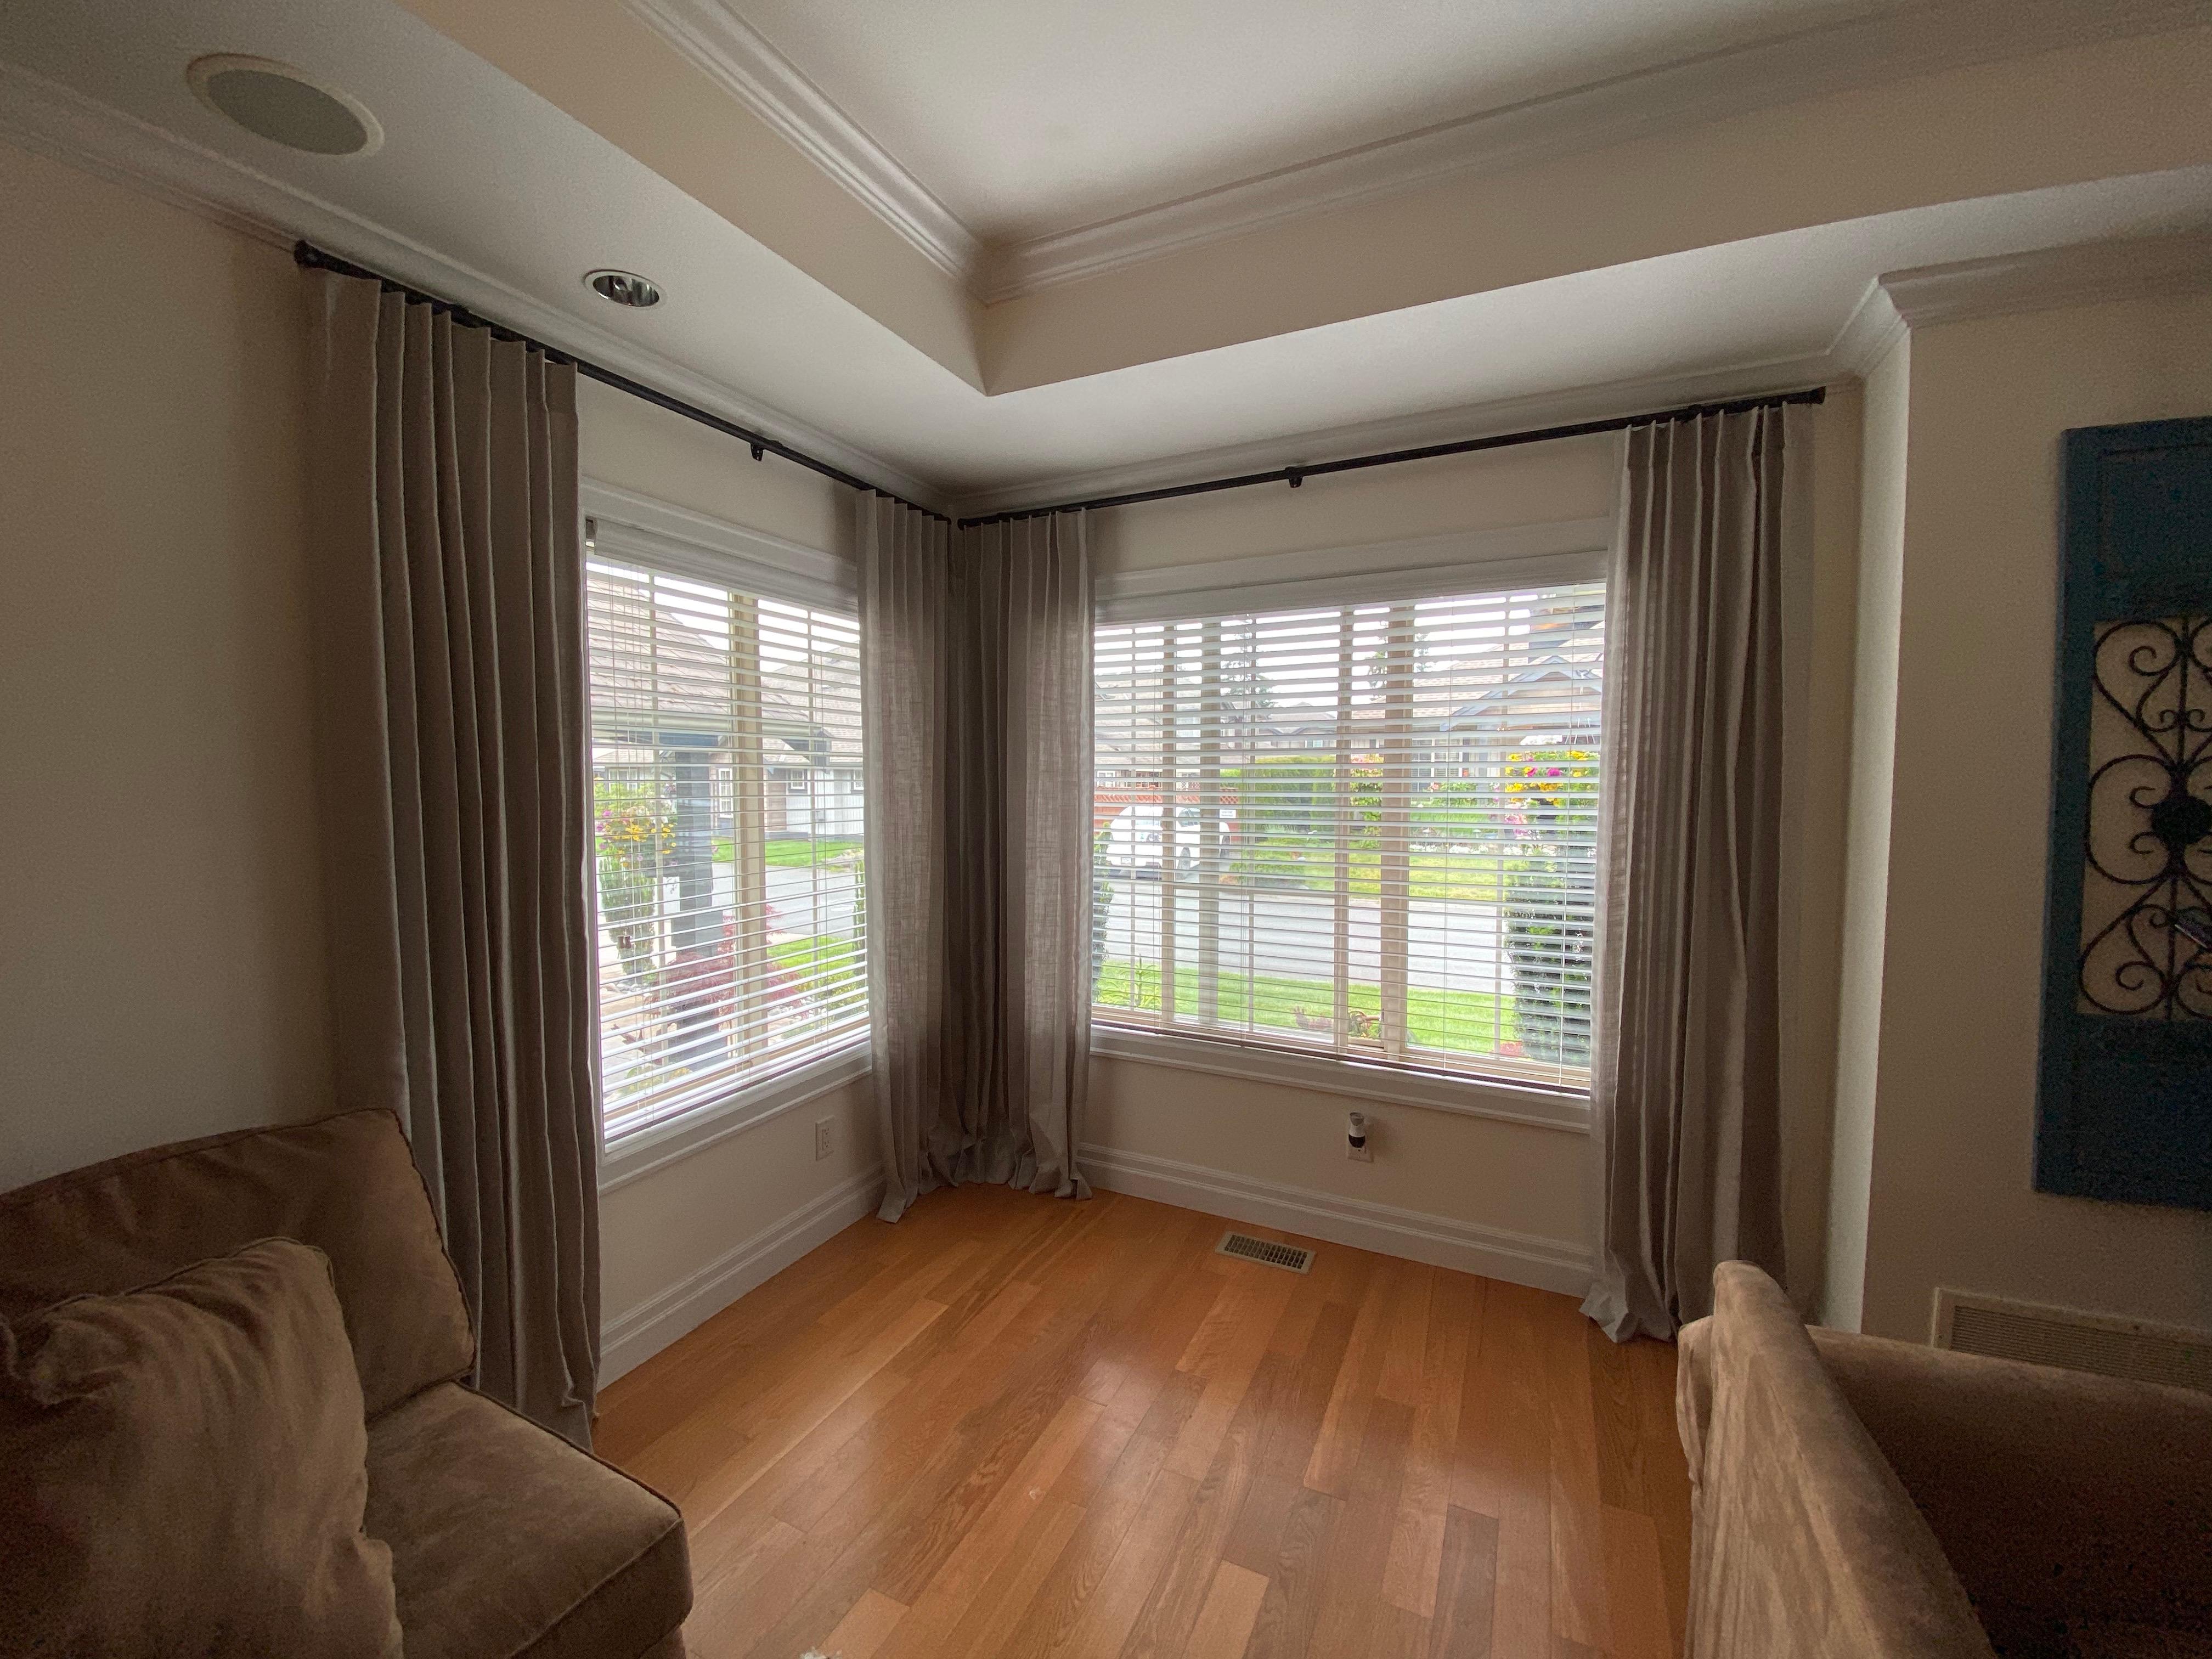 Beautiful pinch pleat drapery was added to frame these windows! Budget Blinds of Chilliwack, Hope and Harrison Chilliwack (604)824-0375